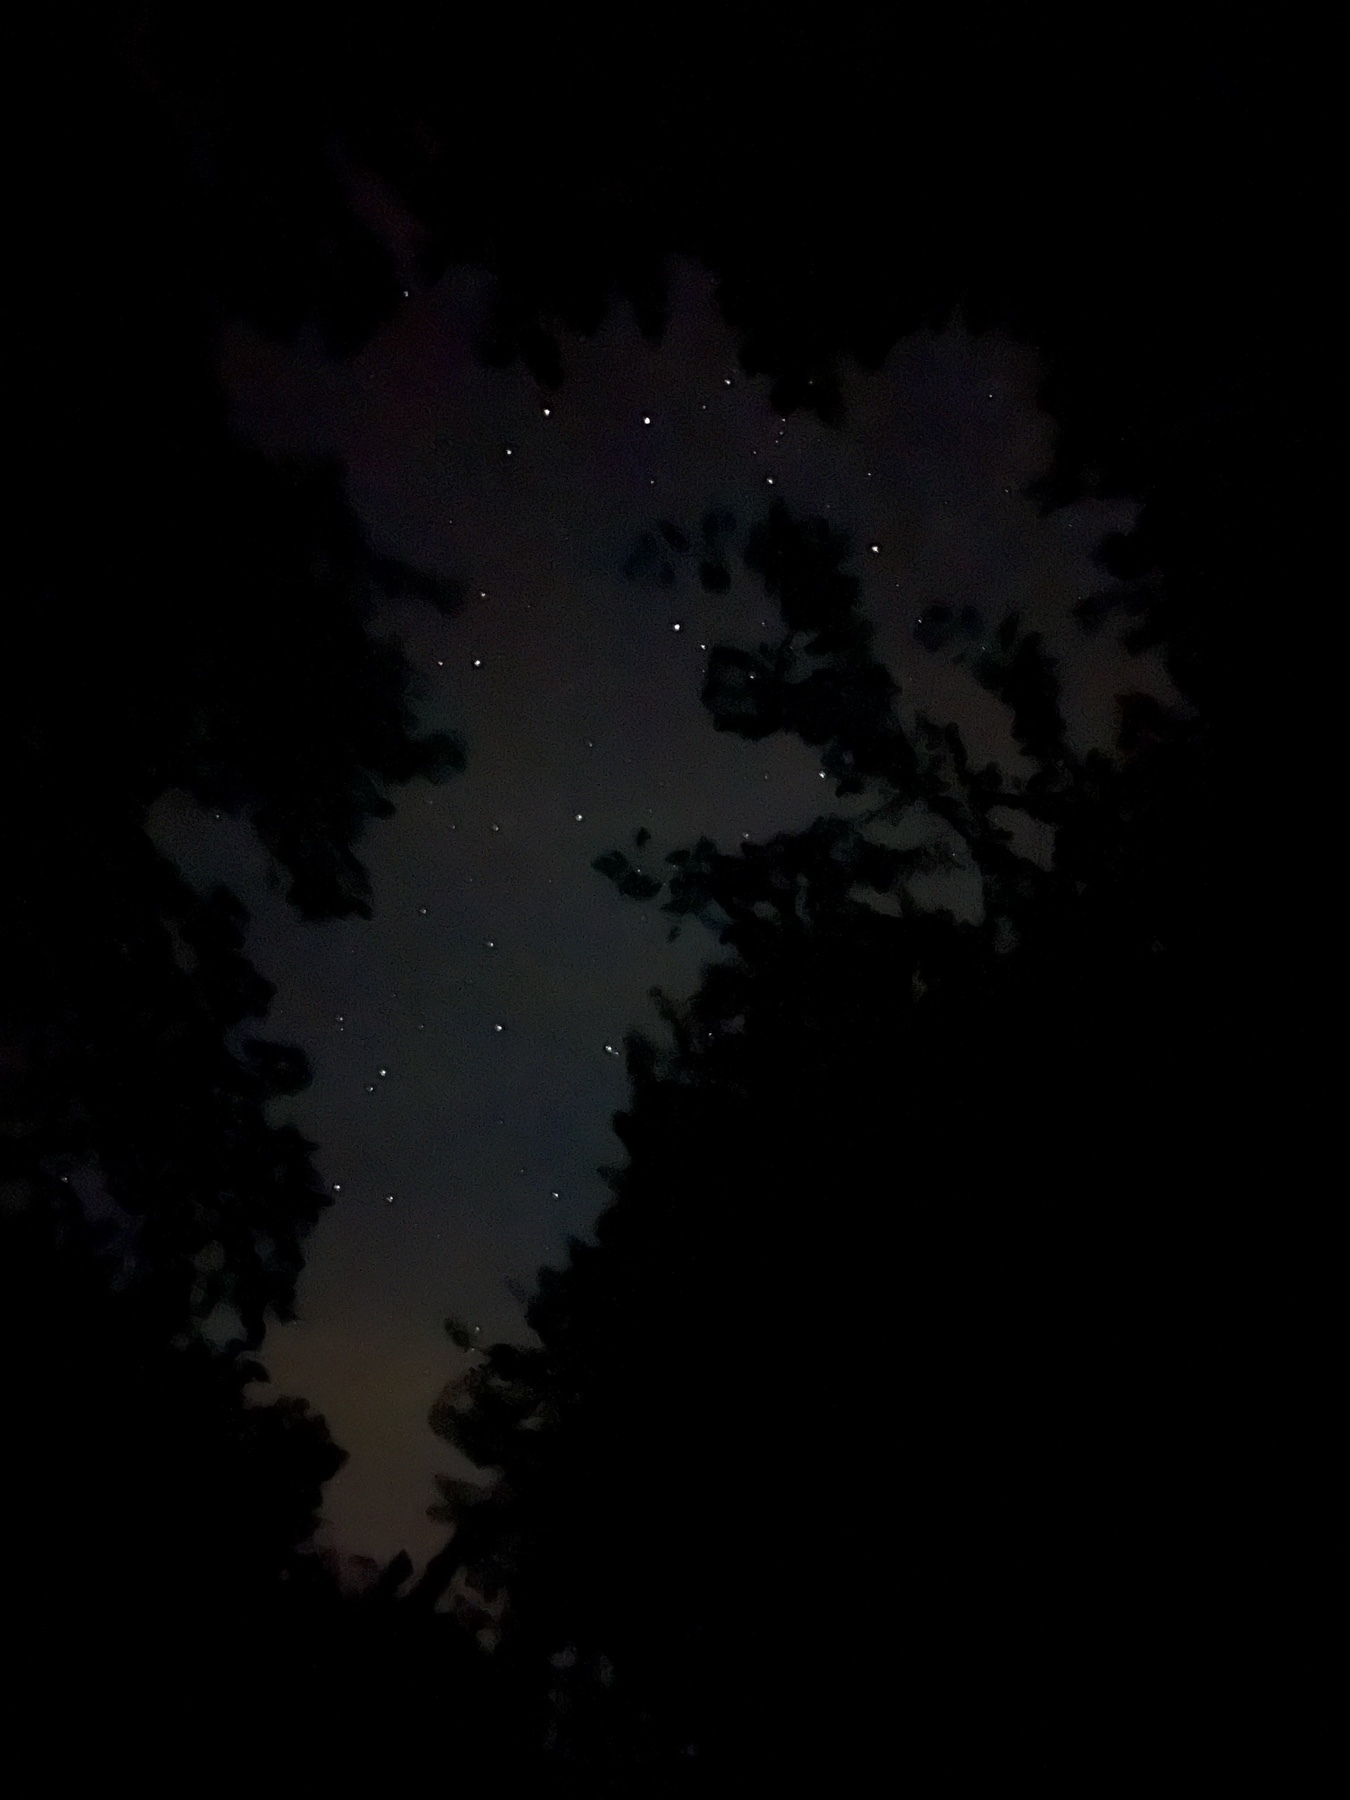 A view of stars through trees.